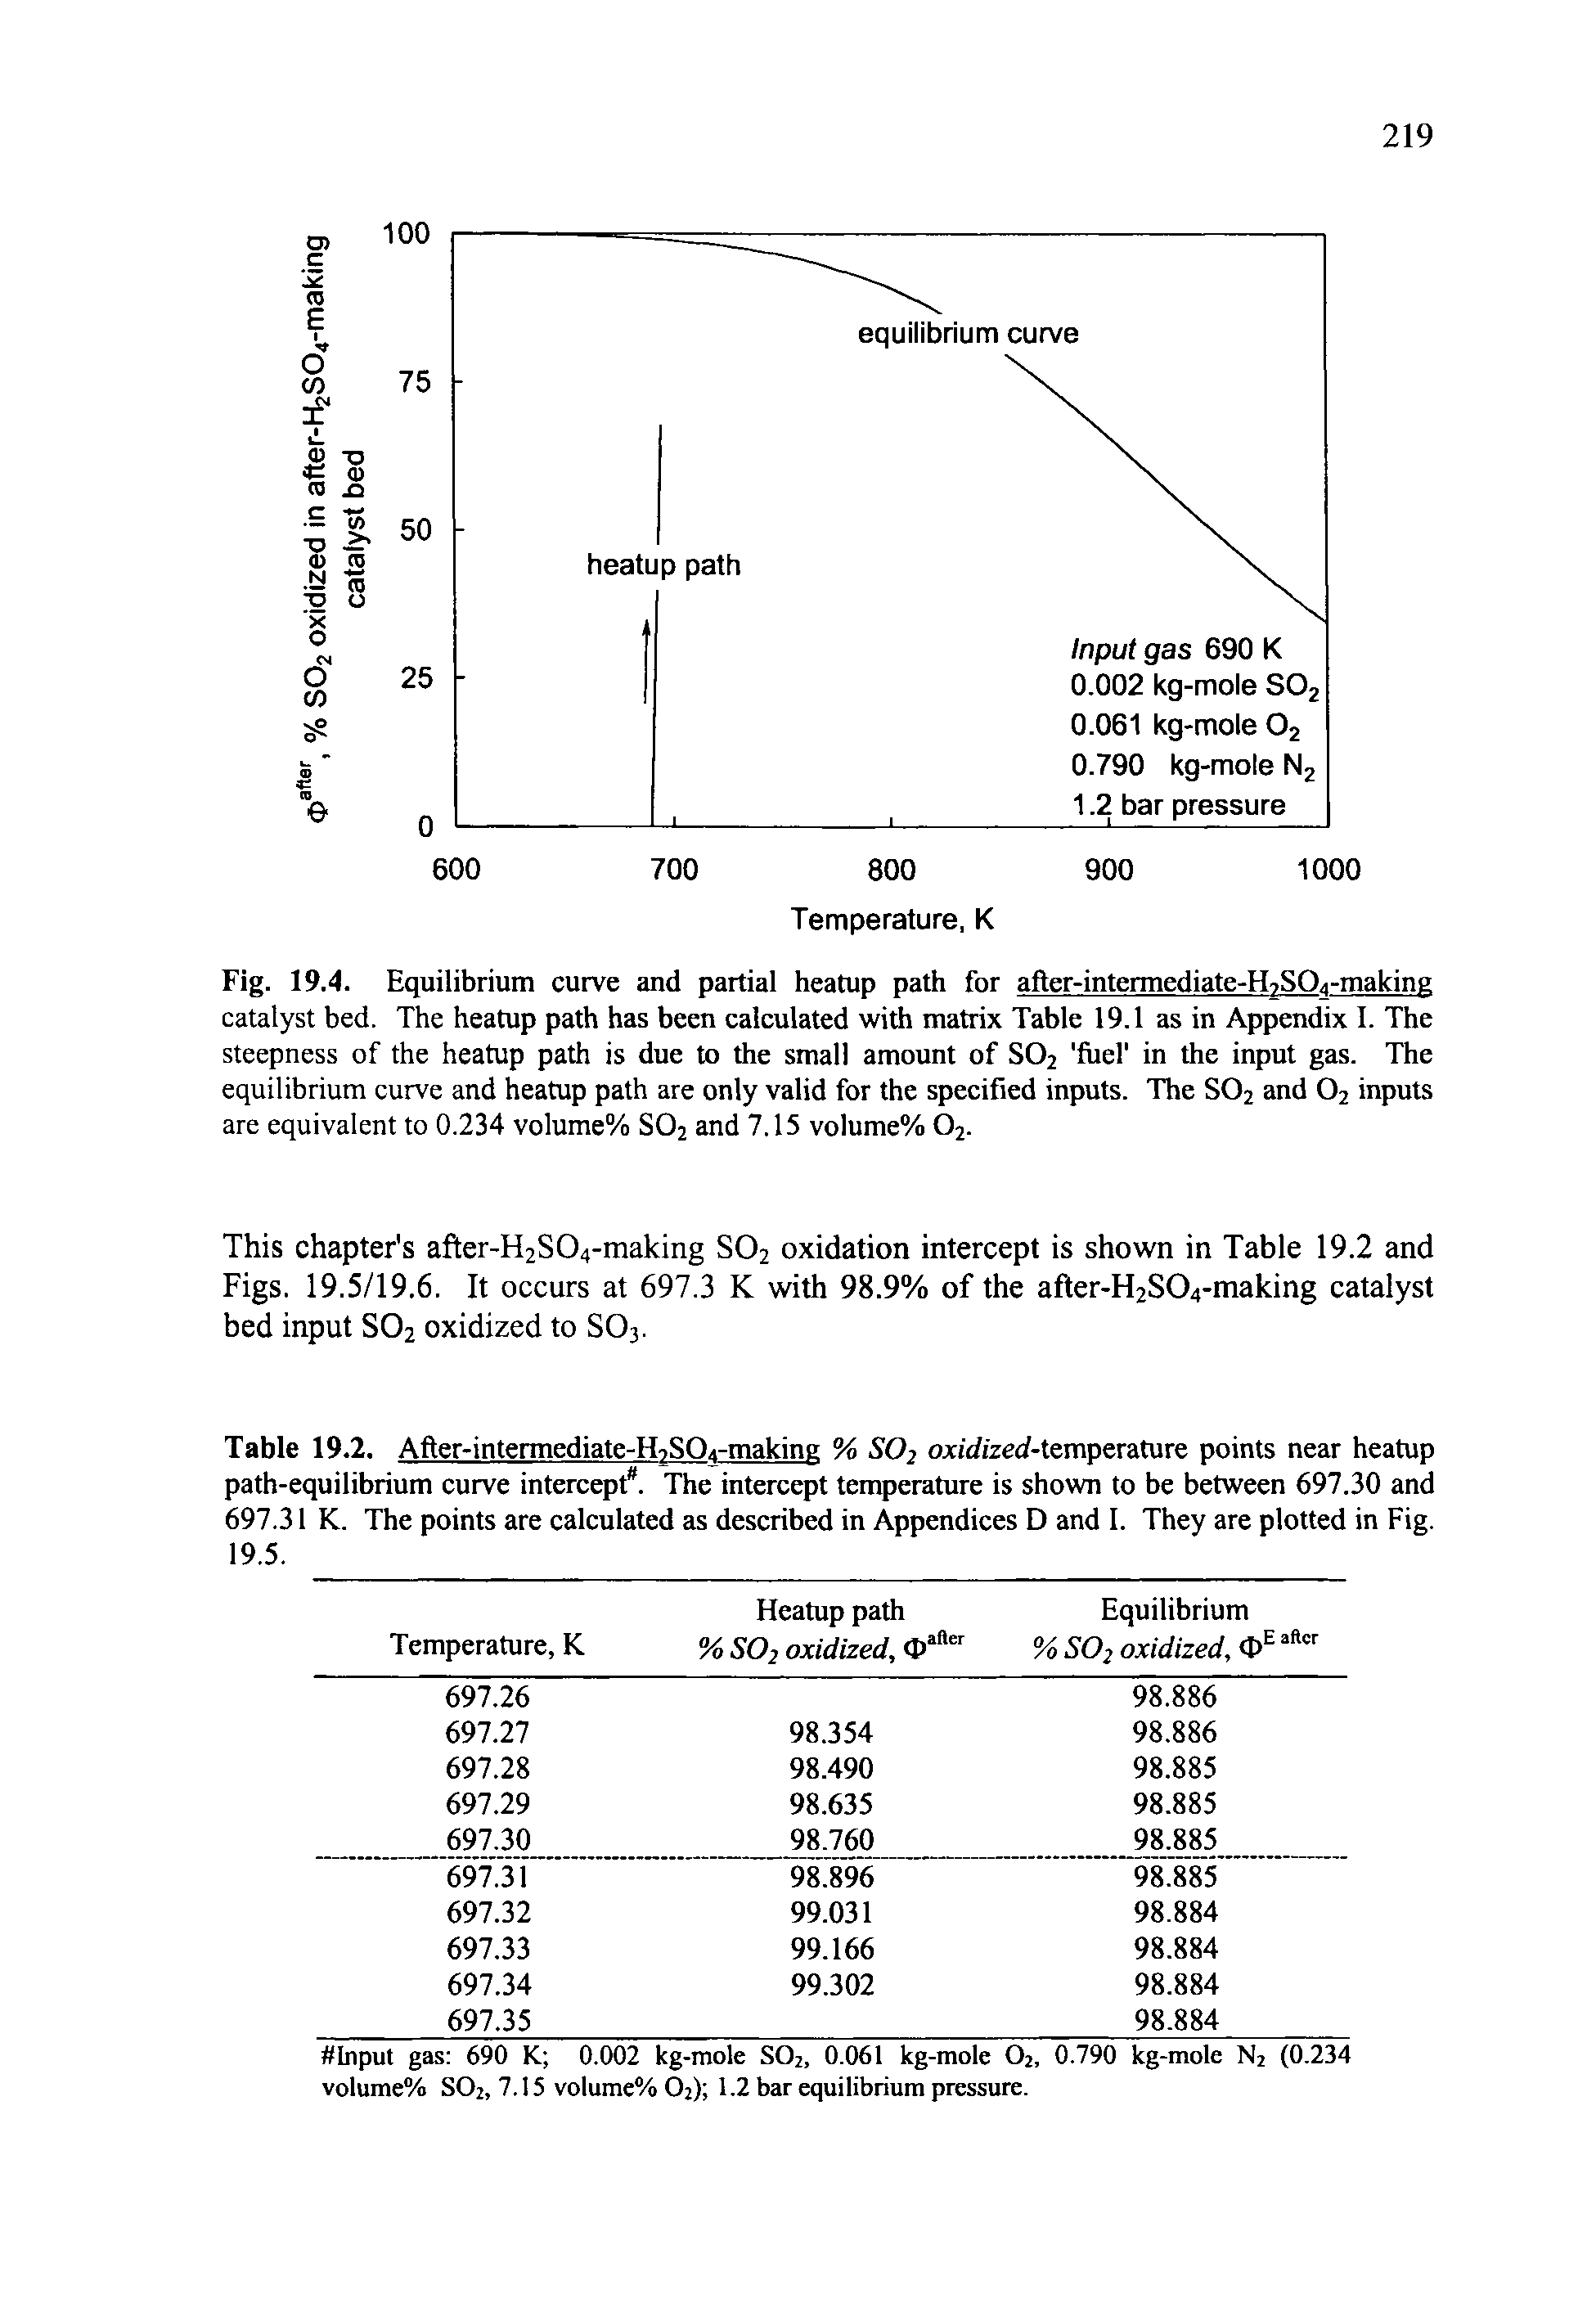 Fig. 19.4. Equilibrium curve and partial heatup path for after-intermediate-fESO -makint catalyst bed. The heatup path has been calculated with matrix Table 19.1 as in Appendix I. The steepness of the heatup path is due to the small amount of S02 fuel in the input gas. The equilibrium curve and heatup path are only valid for the specified inputs. The S02 and 02 inputs are equivalent to 0.234 volume% S02 and 7.15 volume% 02.